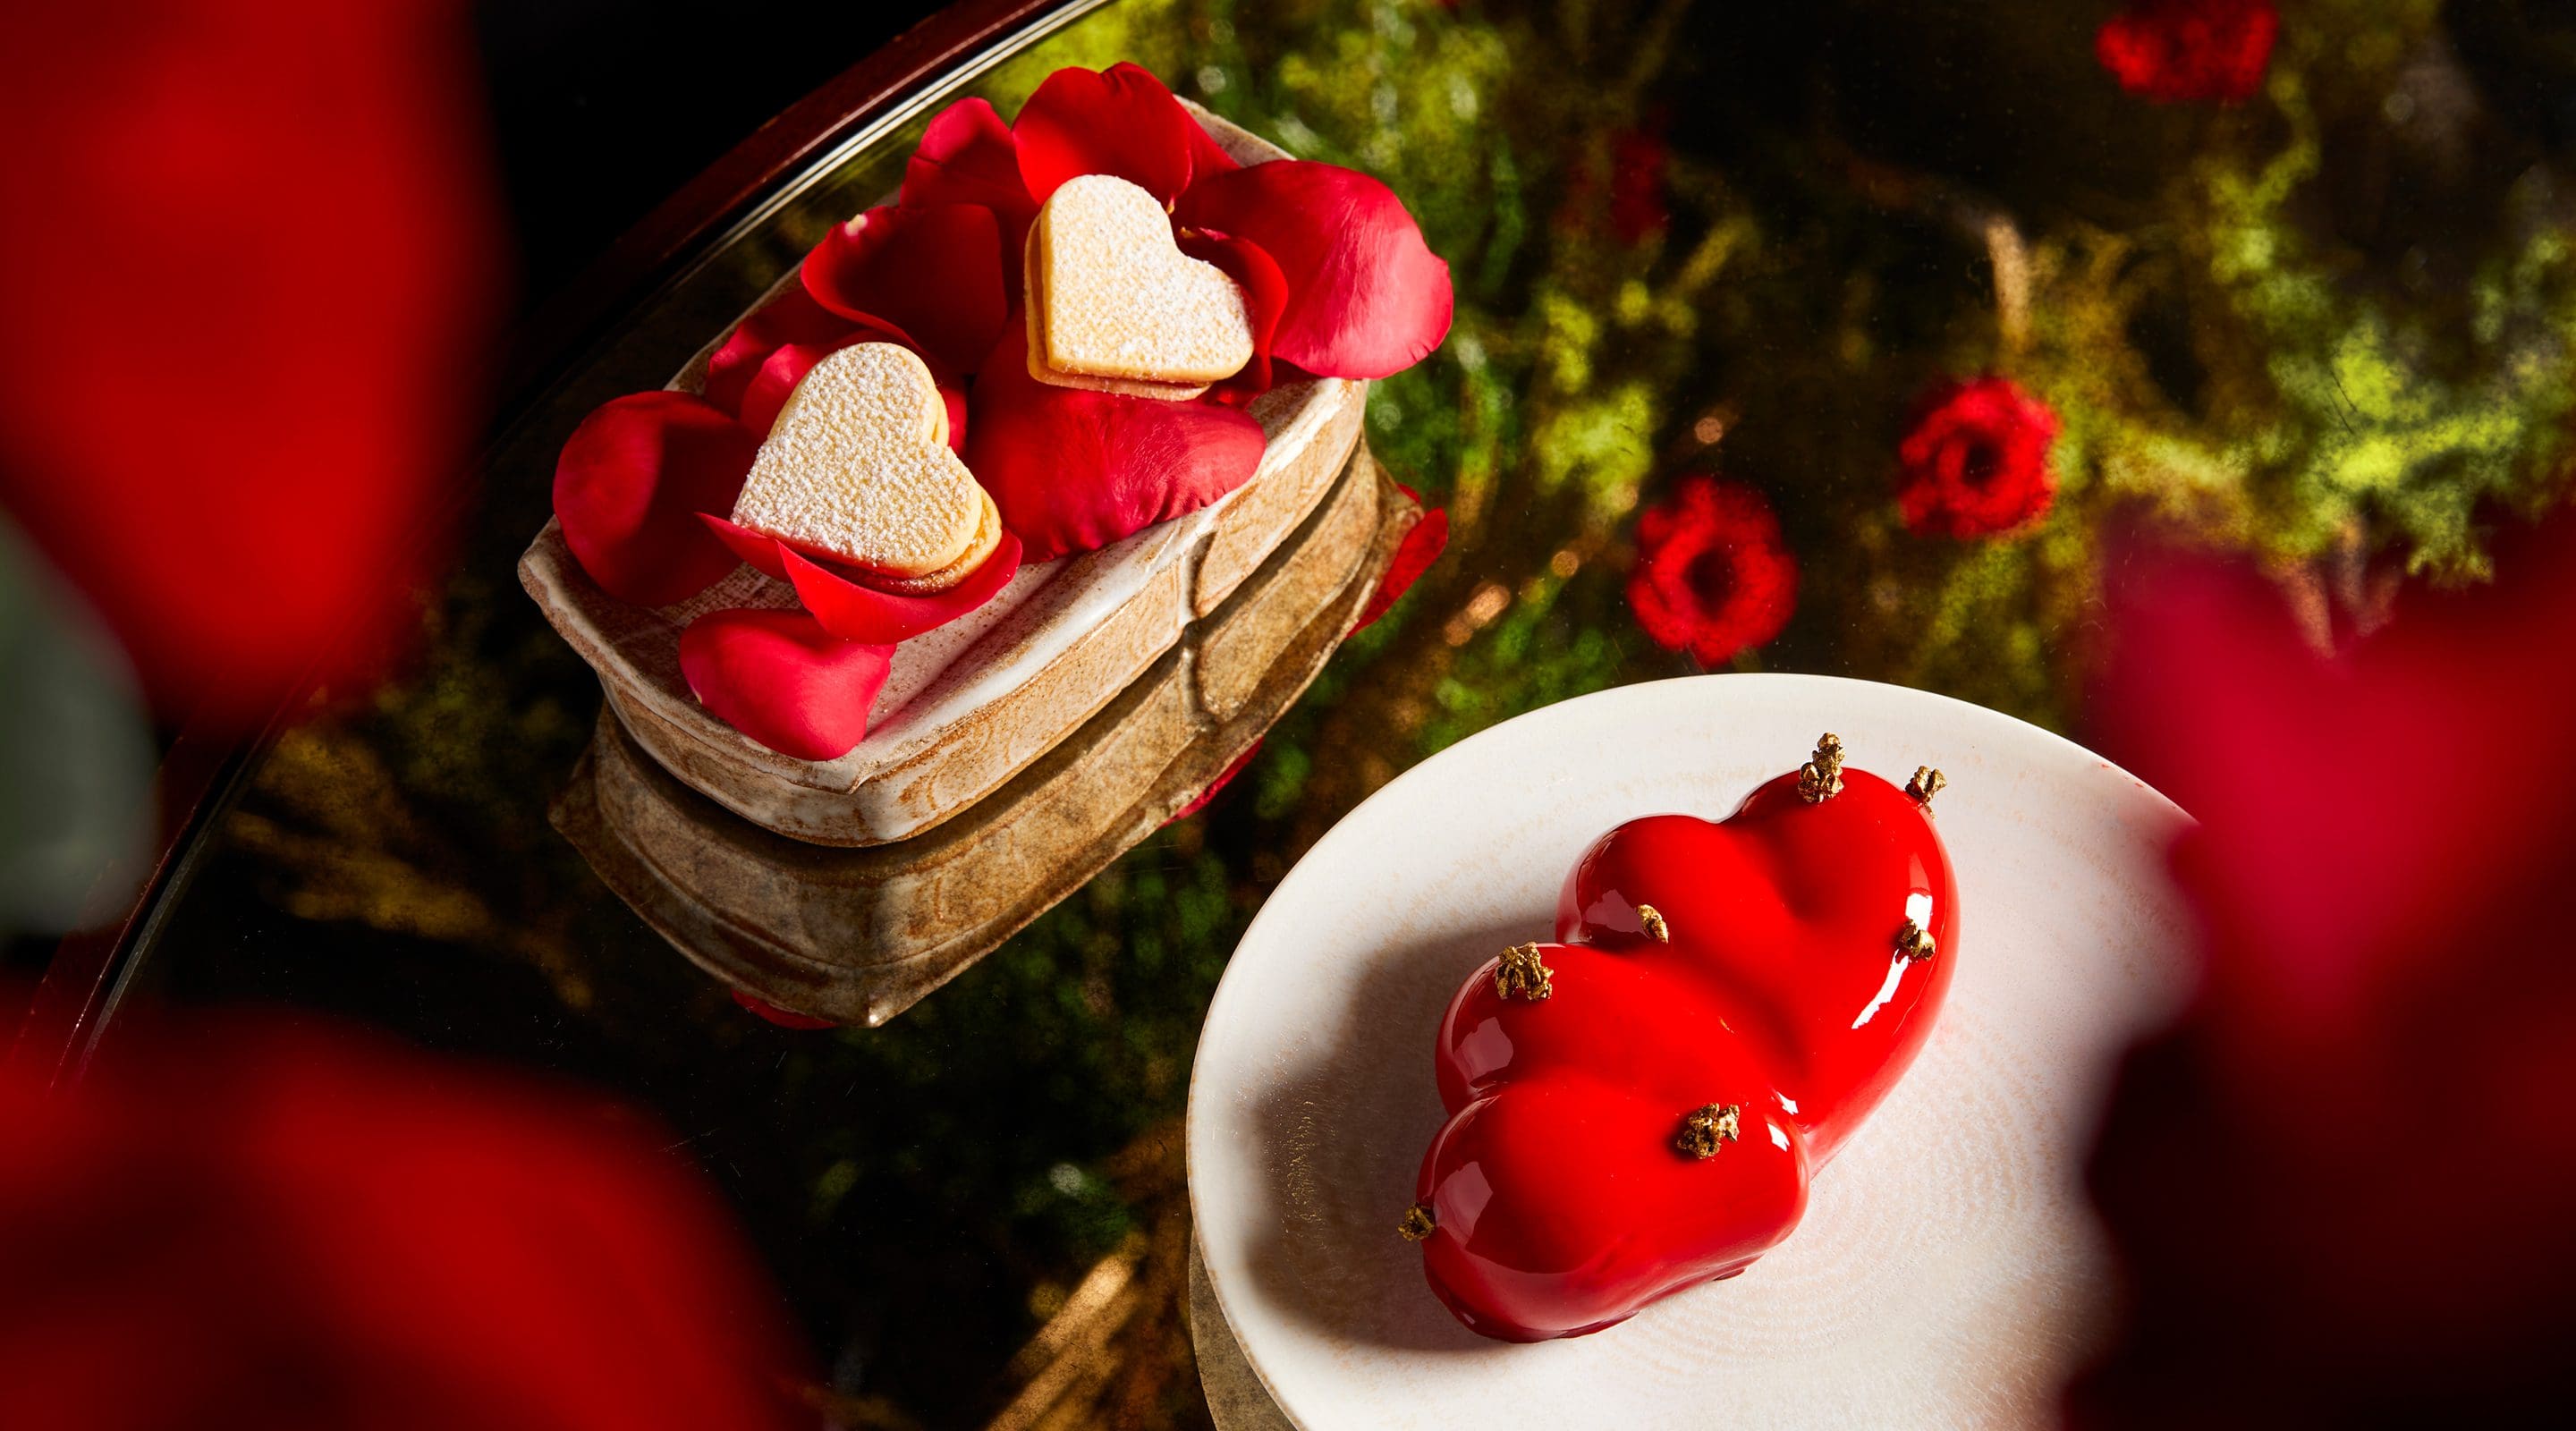 Best French restaurants in London to book for Valentine's day